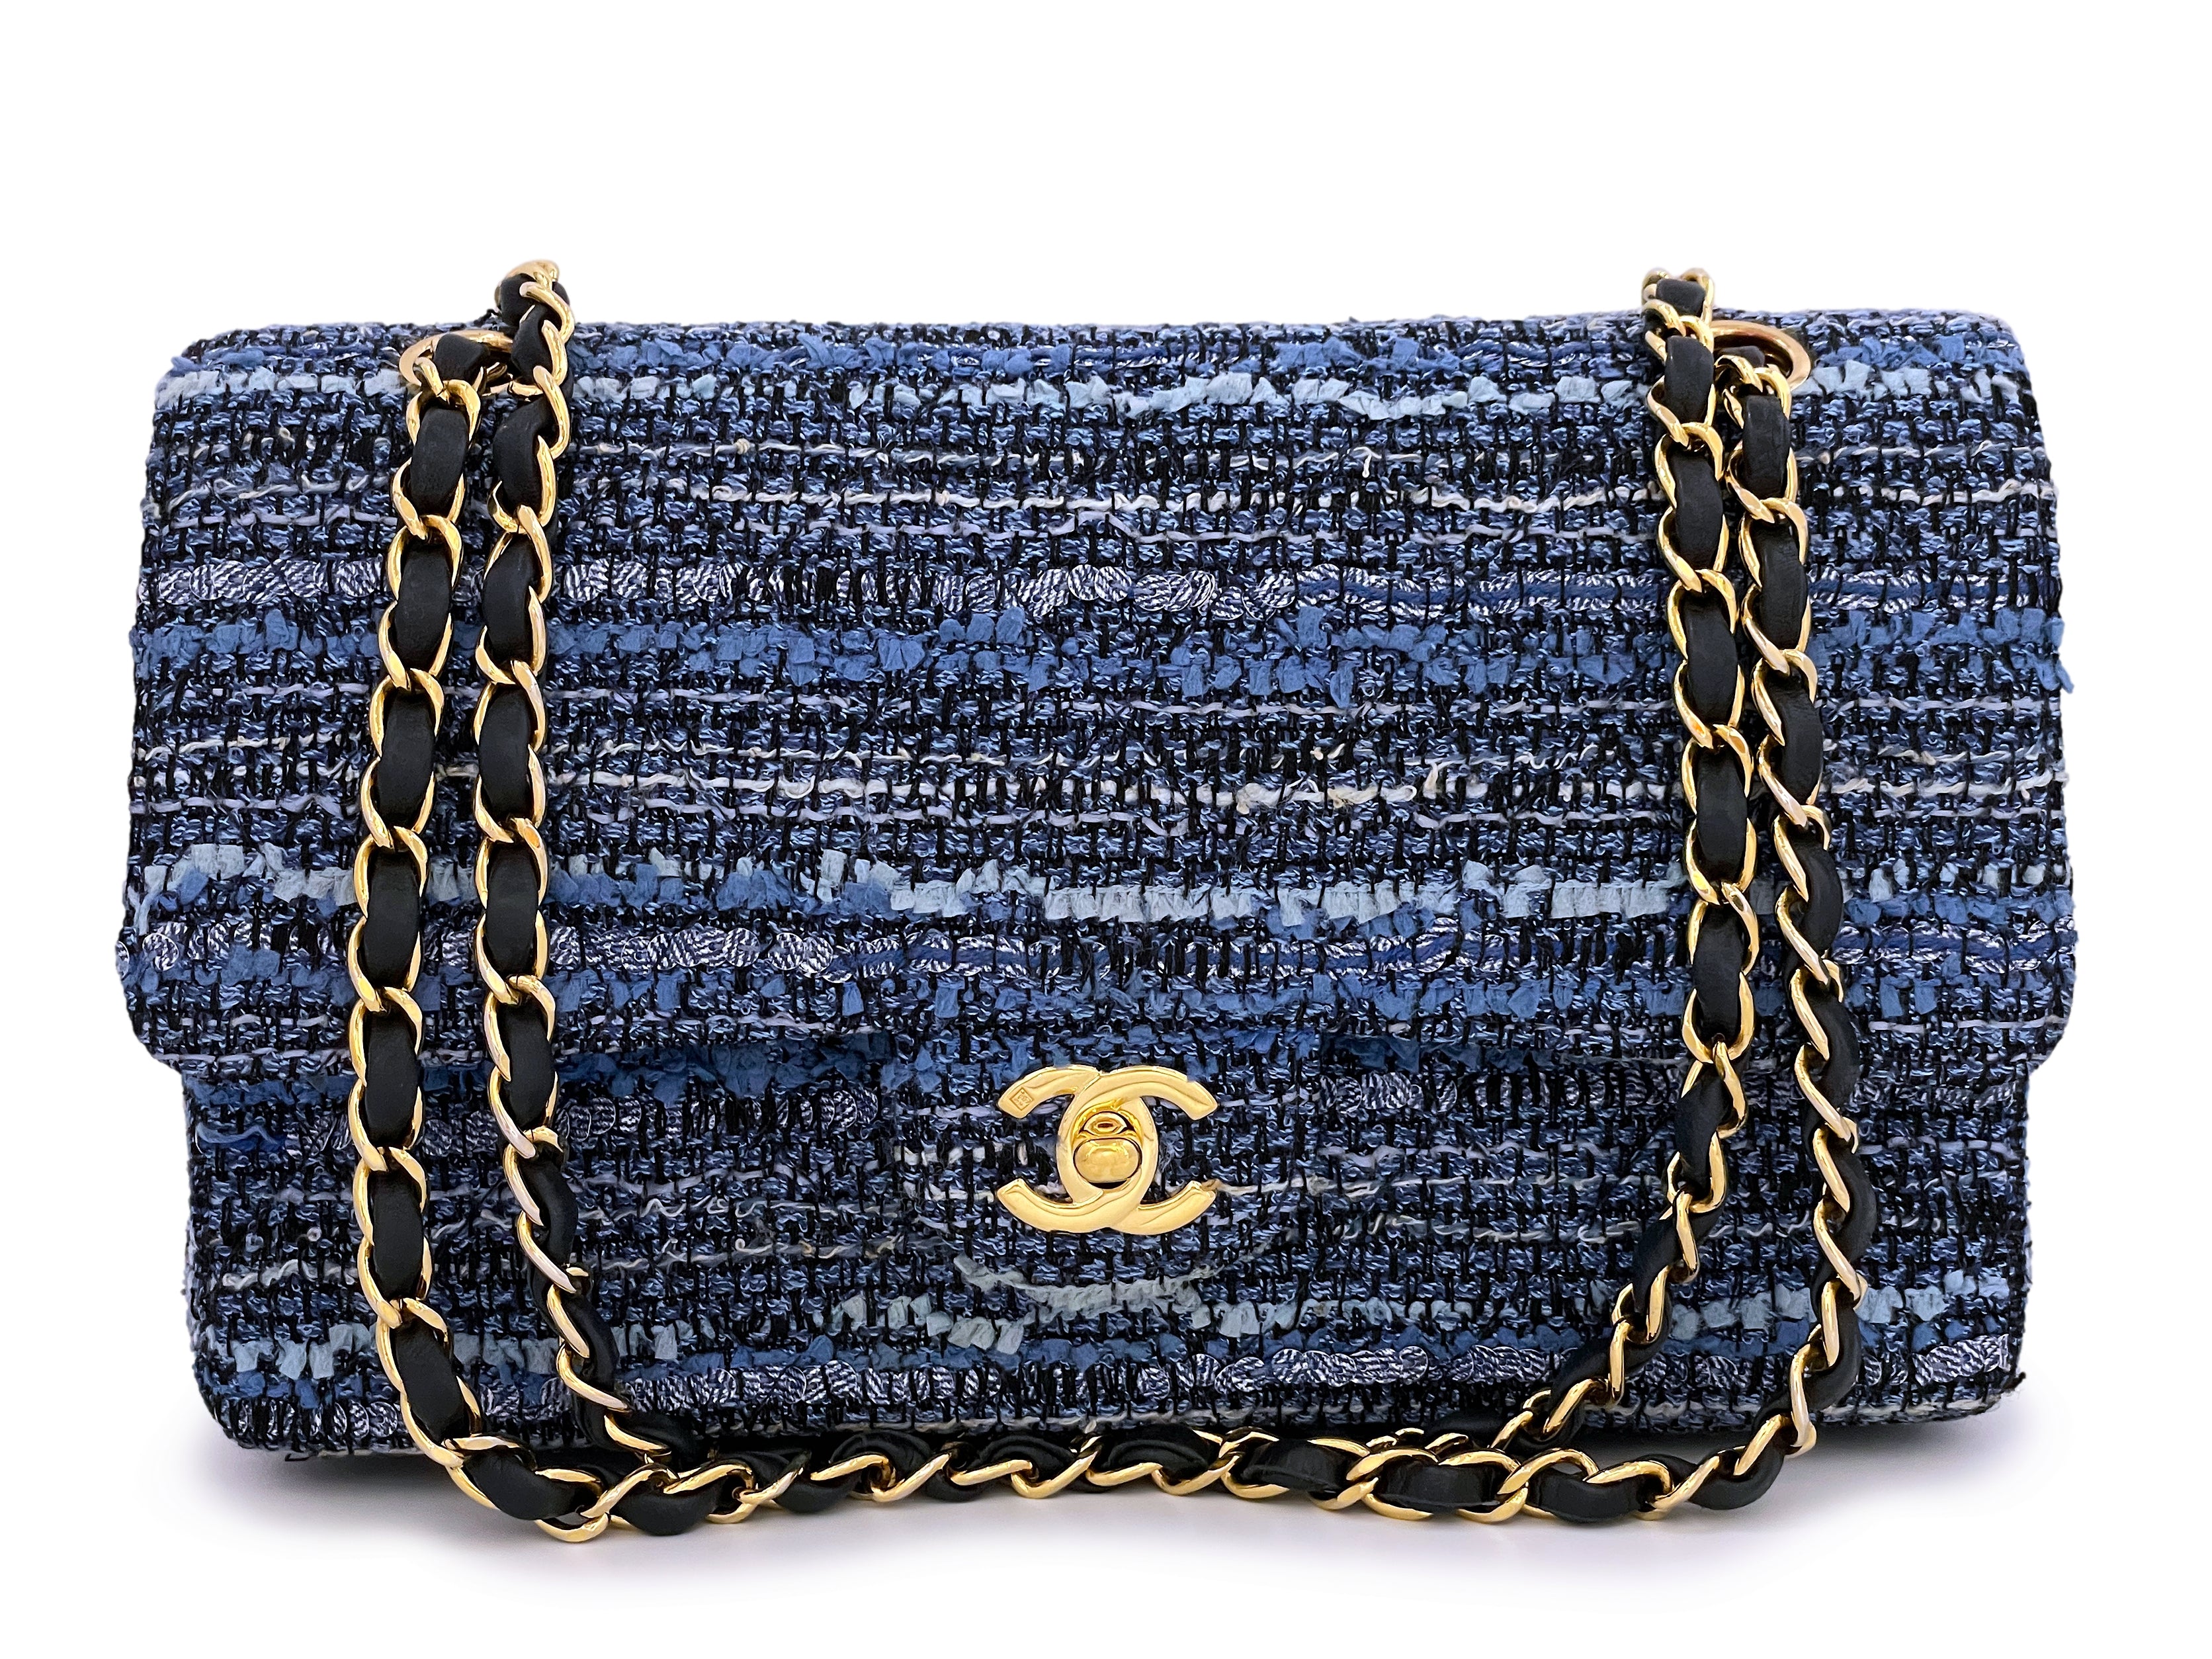 A BLUE IRIDESCENT LAMBSKIN LEATHER SMALL CLASSIC FLAP BAG & A SET OF TWO  CARD HOLDERS, CHANEL, 2019